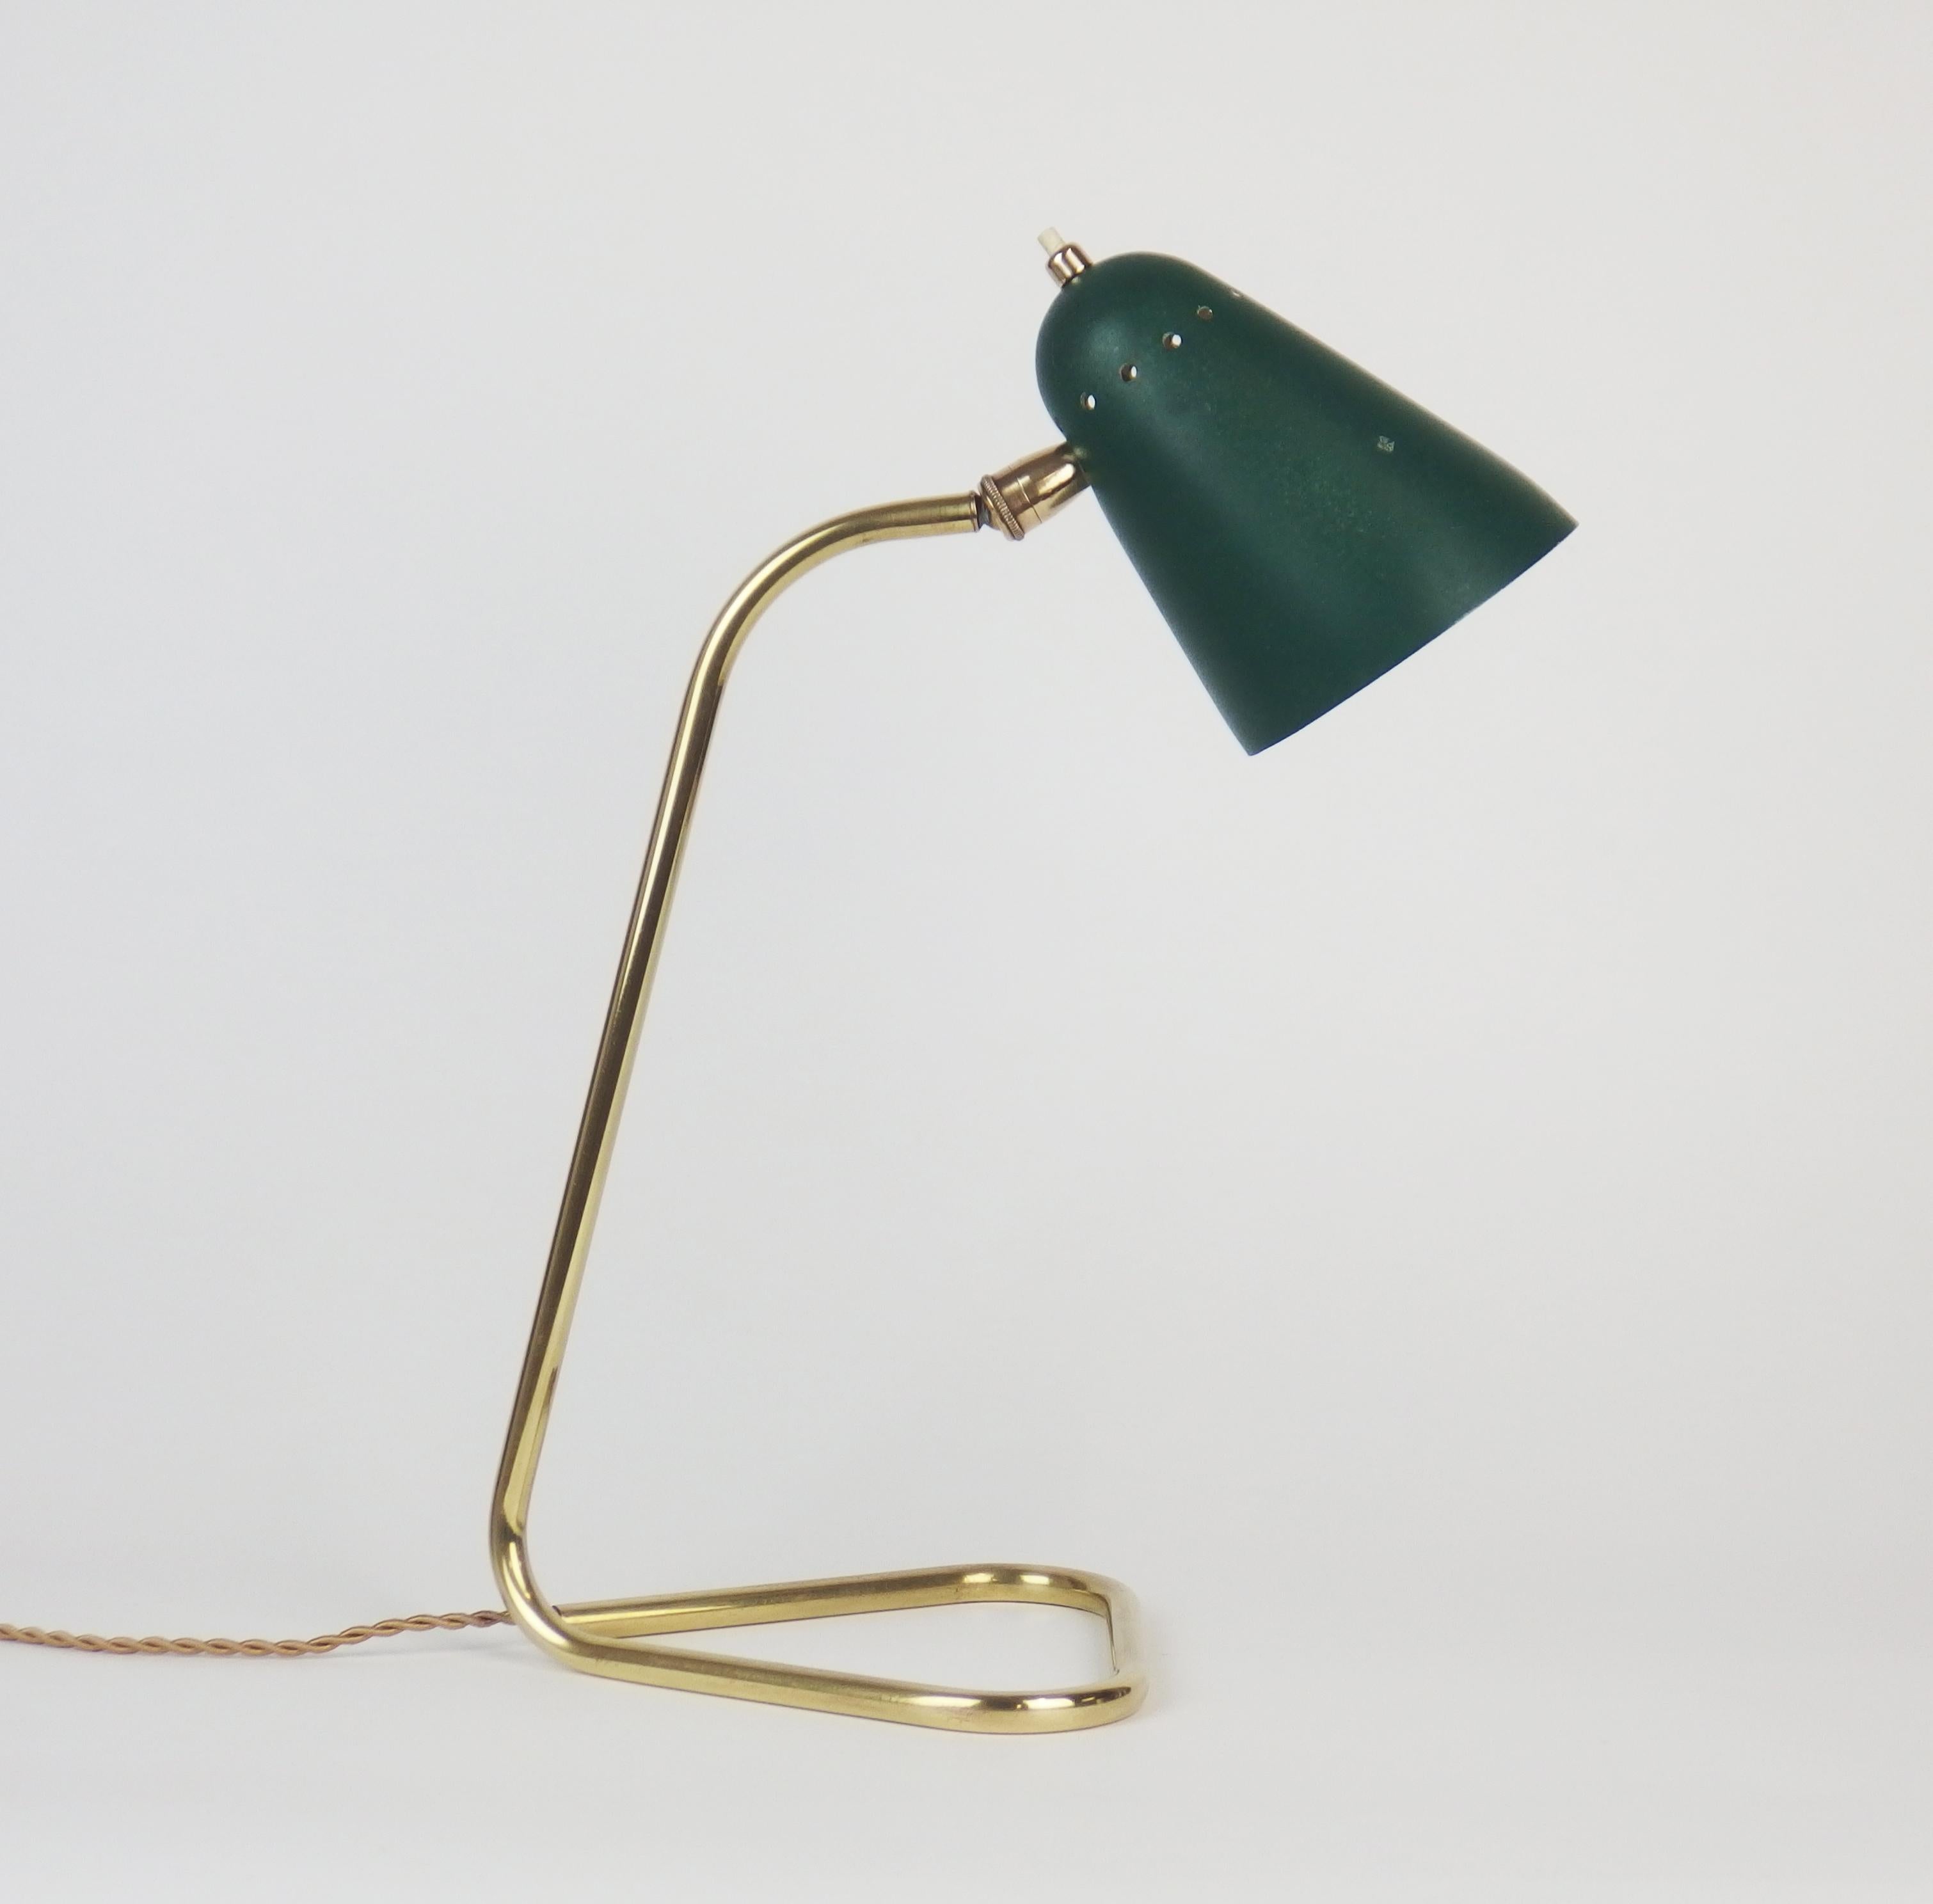 A rare 1950s table lamp by Robert Mathieu with a brass base and an adjustable green enameled aluminium shade.
The socket can be replaced by an American socket.